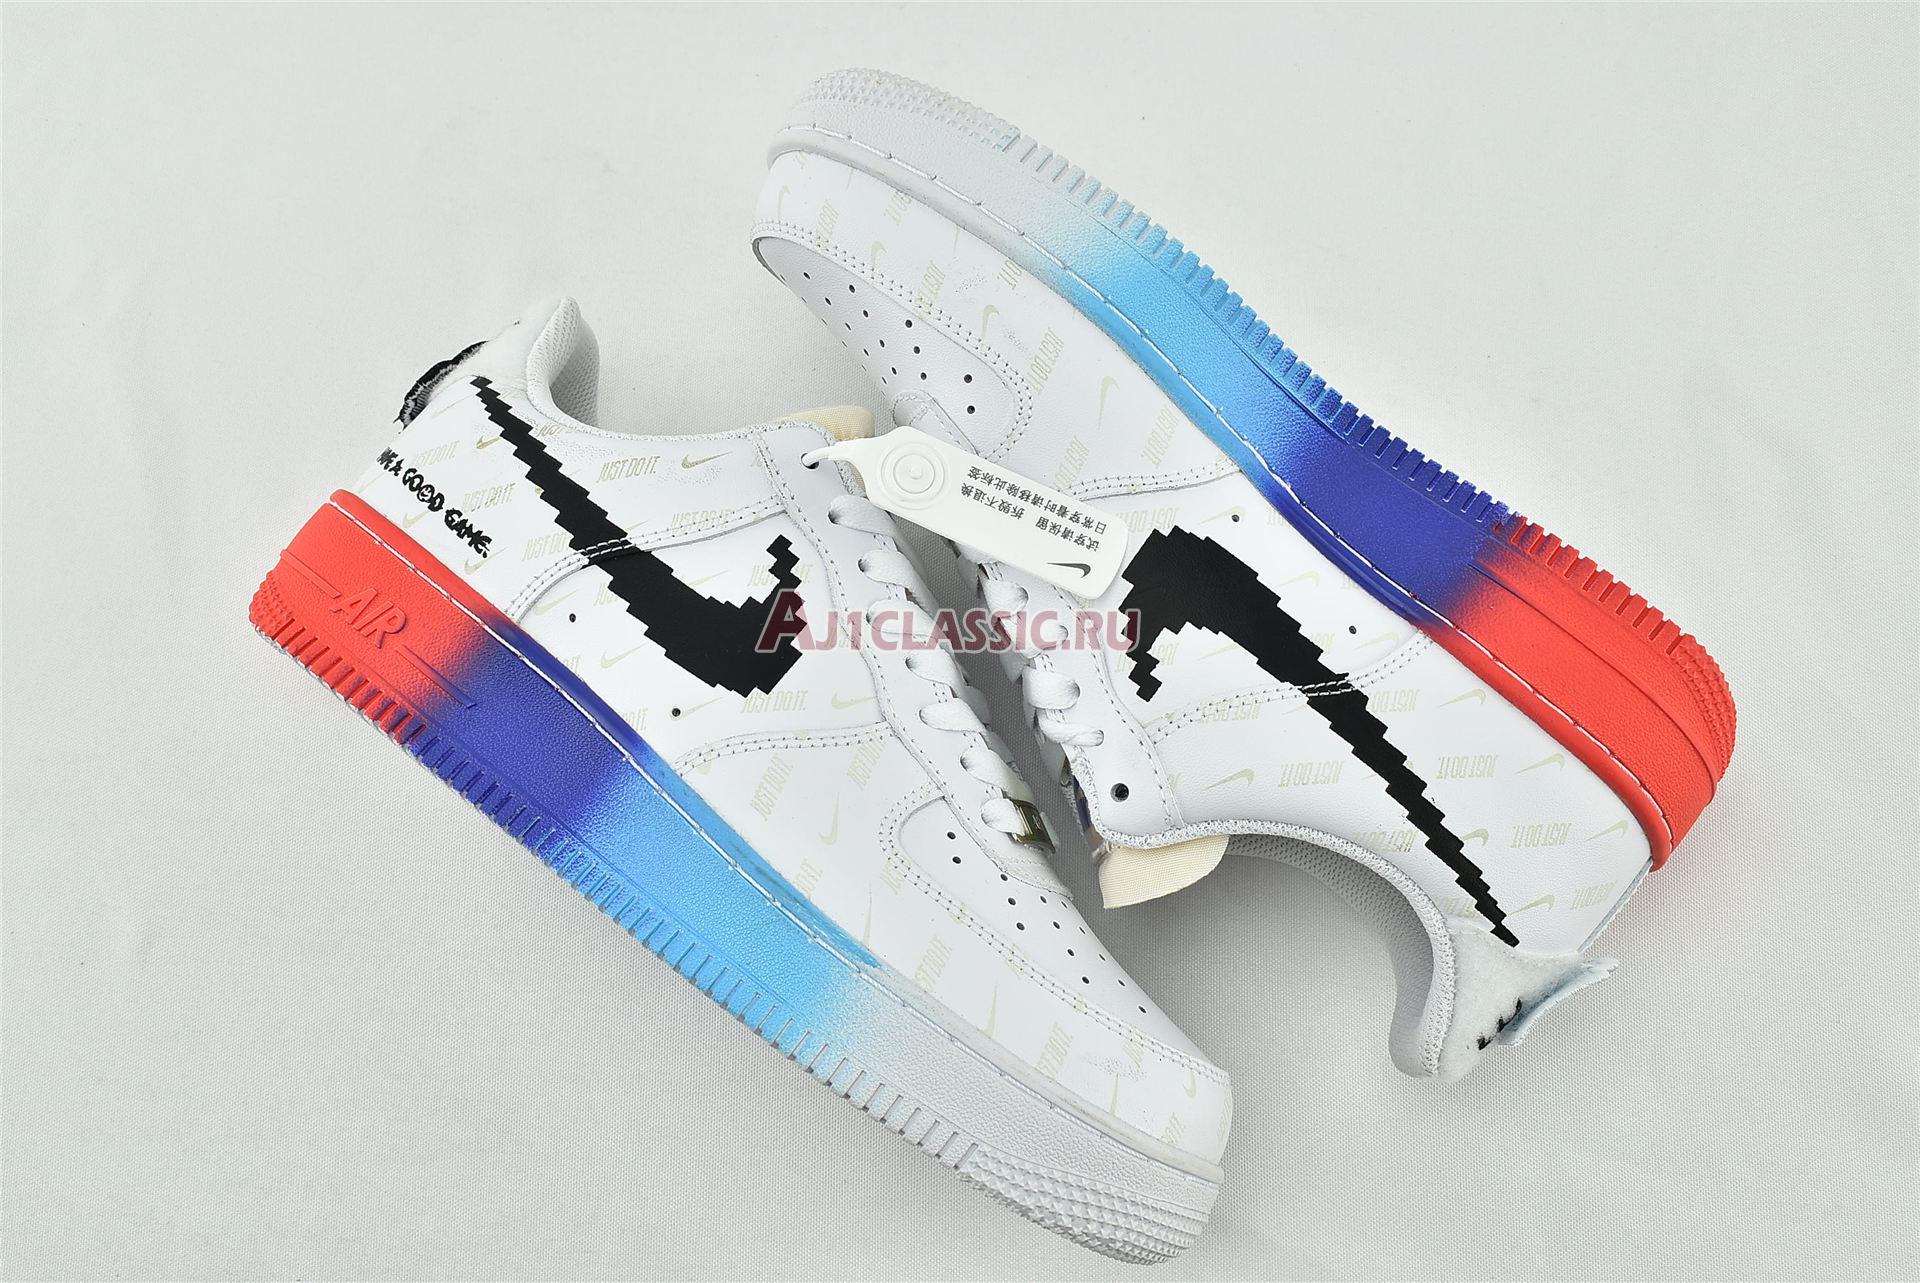 Nike Air Force 1 Low "Have A Good Game" 318155-113